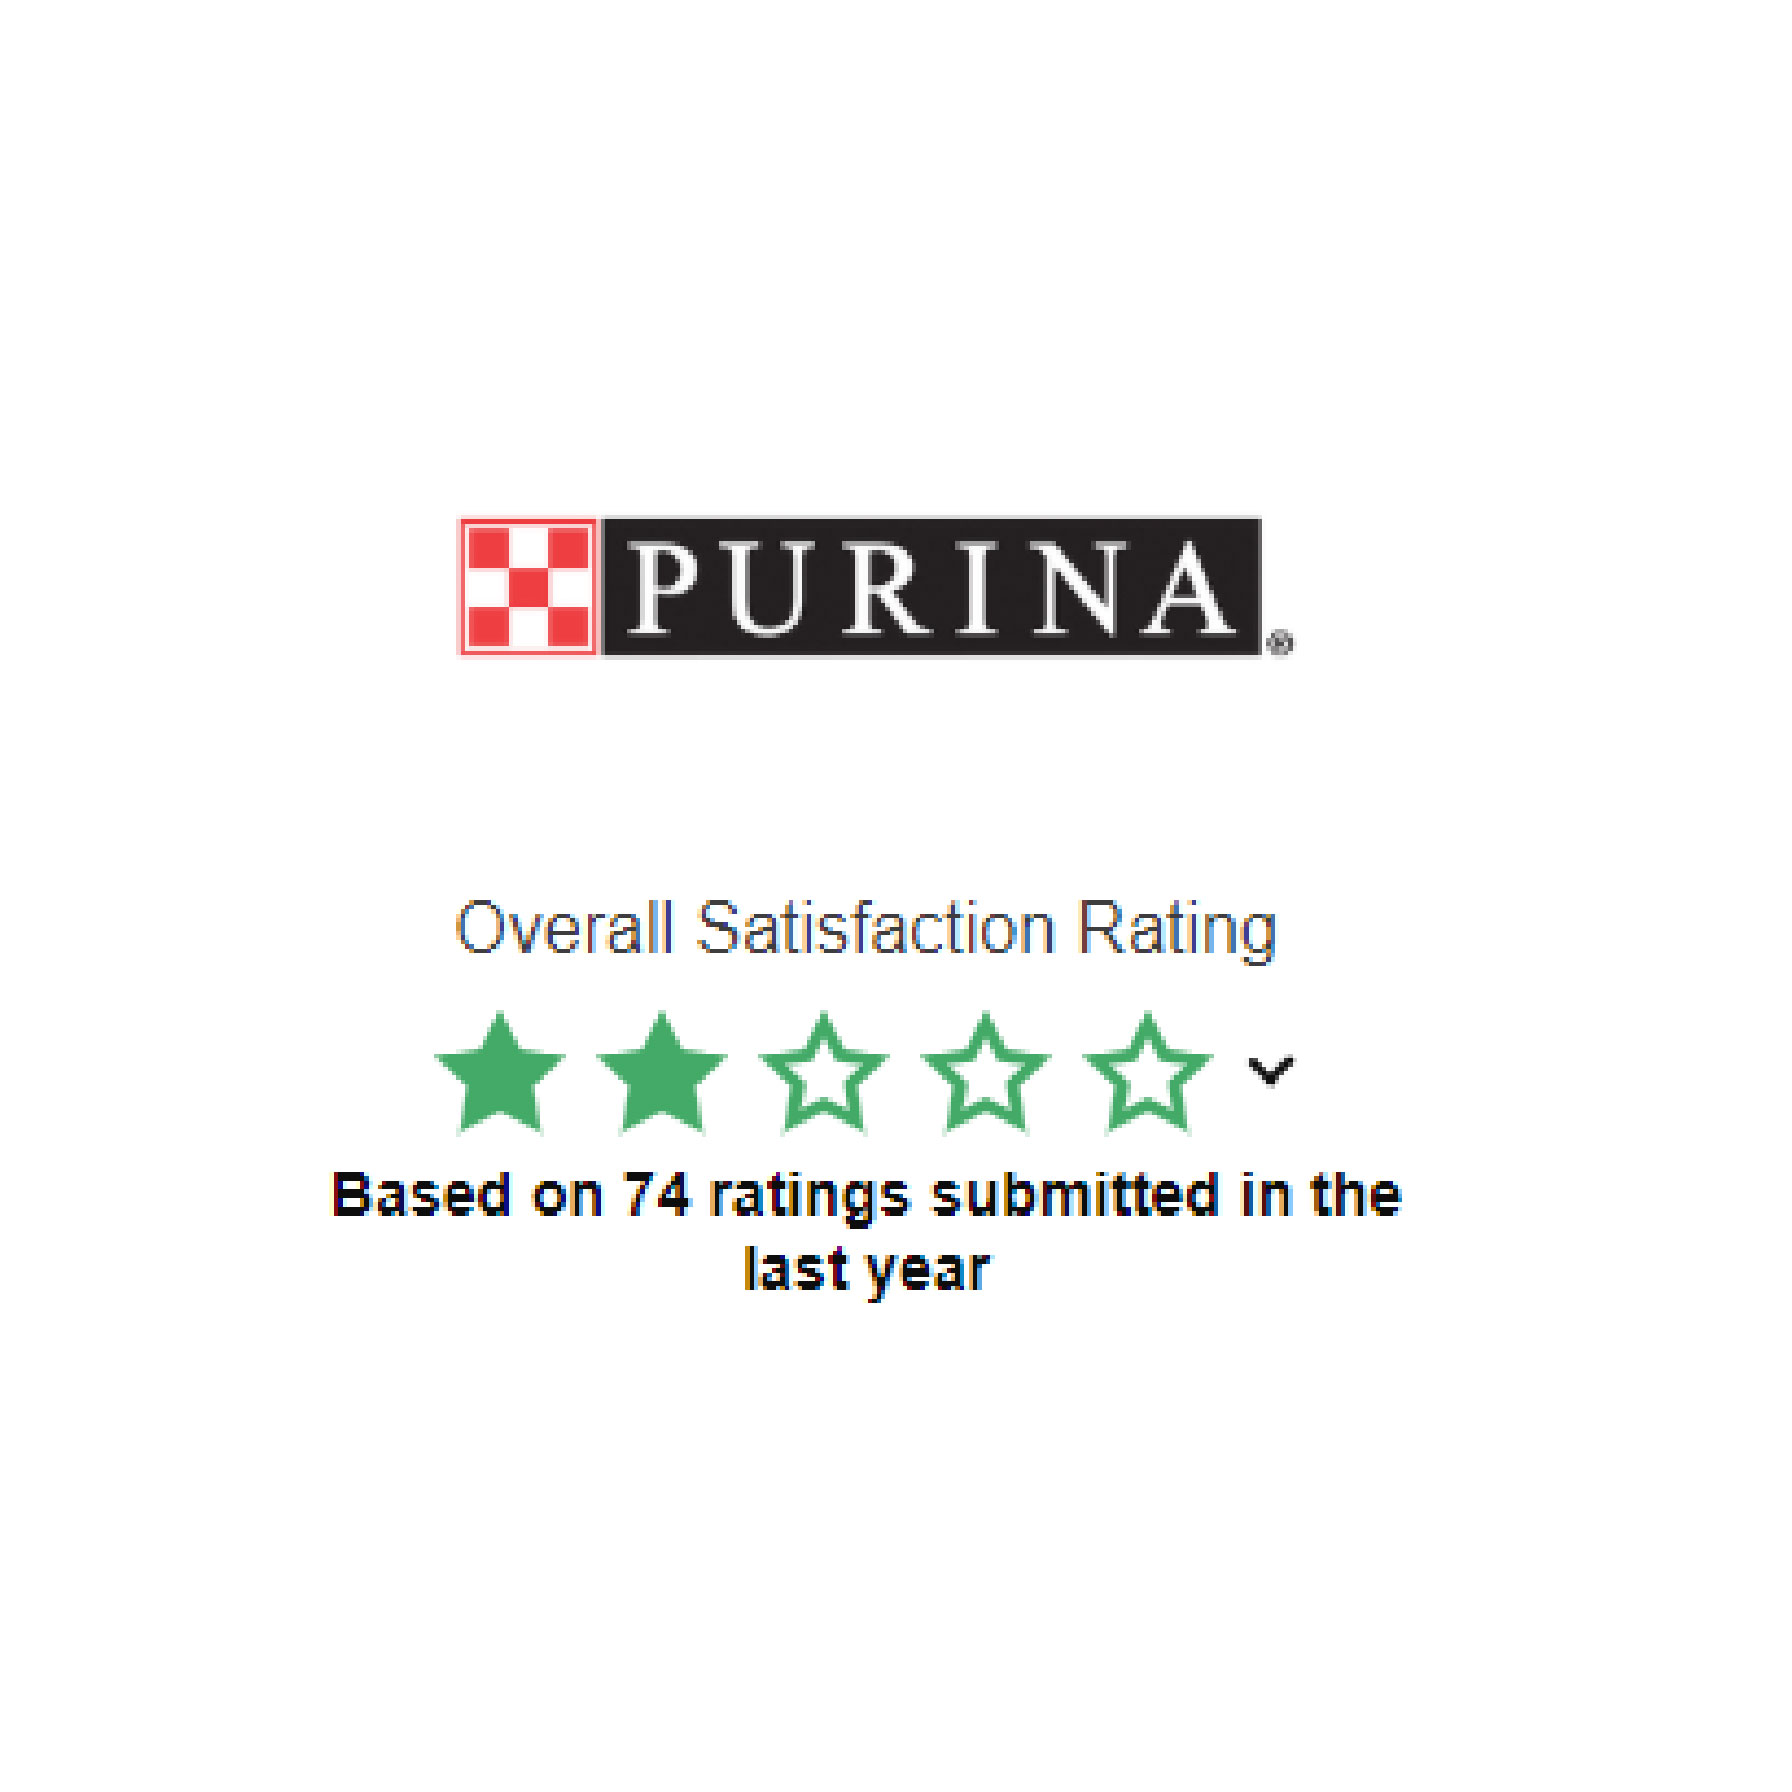 Consumer Reviews for Purina Pet Food - Risks of Commercial Pet Foods for Dogs & Cats